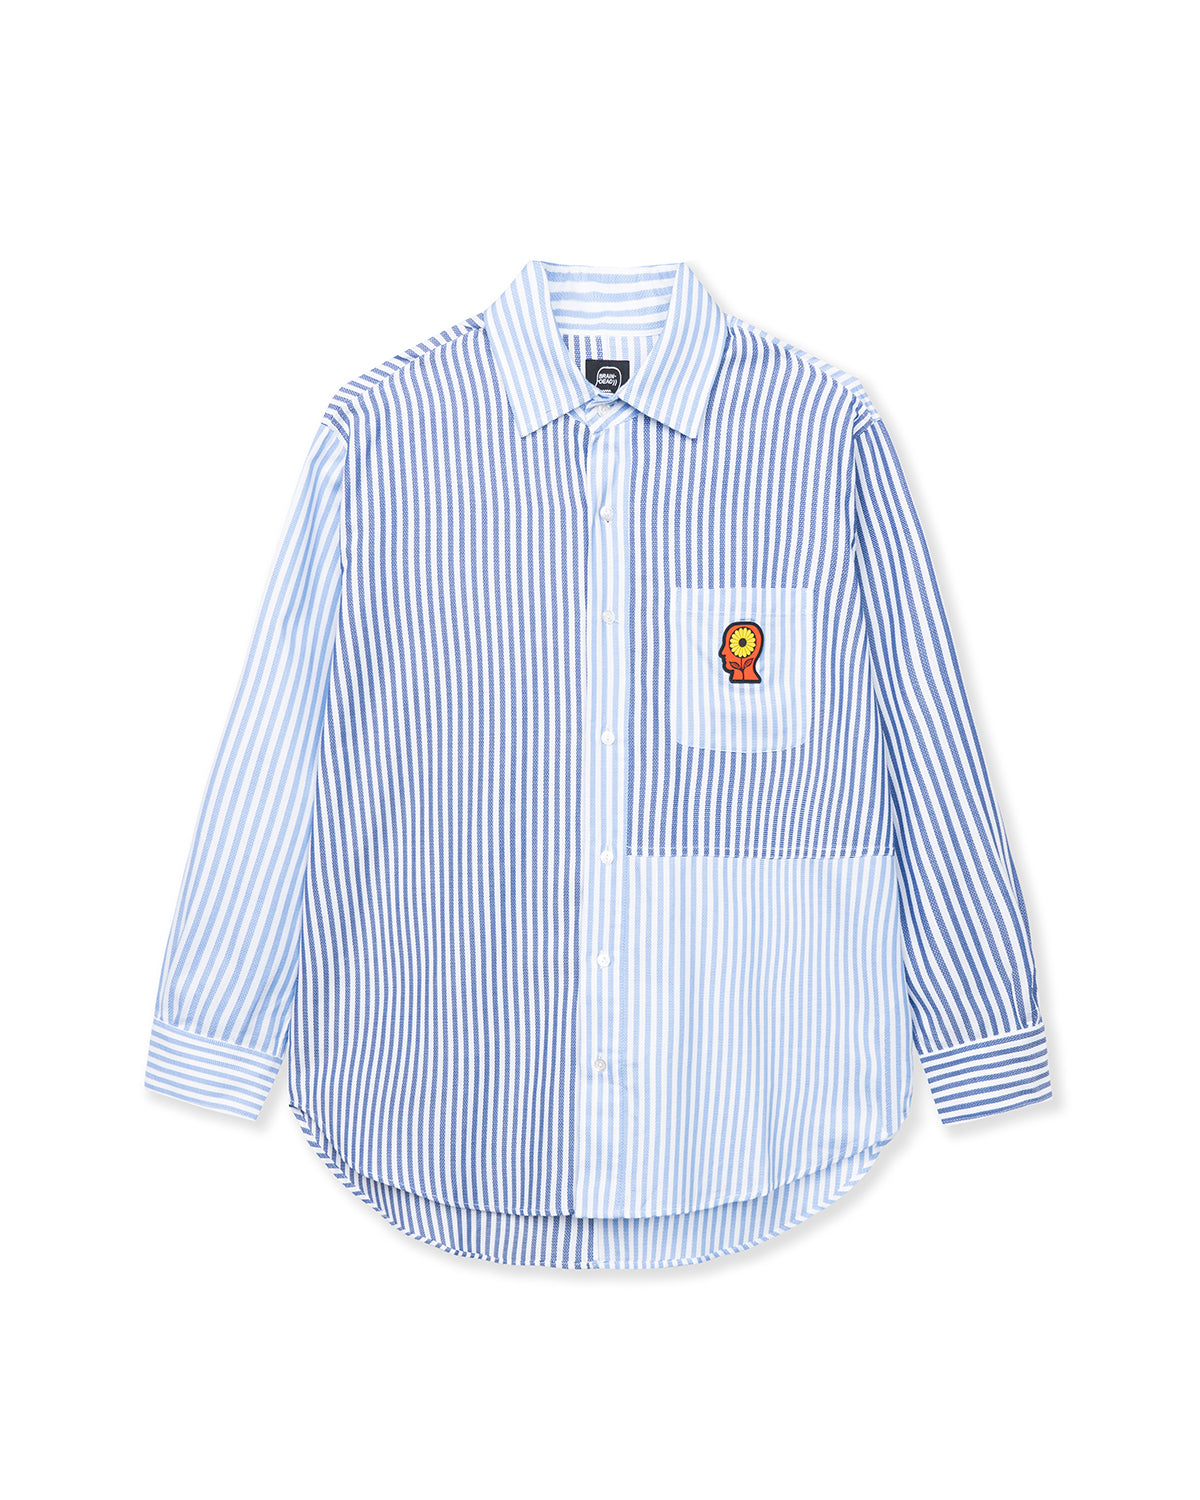 SUNFLOWER PANELED OXFORD BUTTON UP